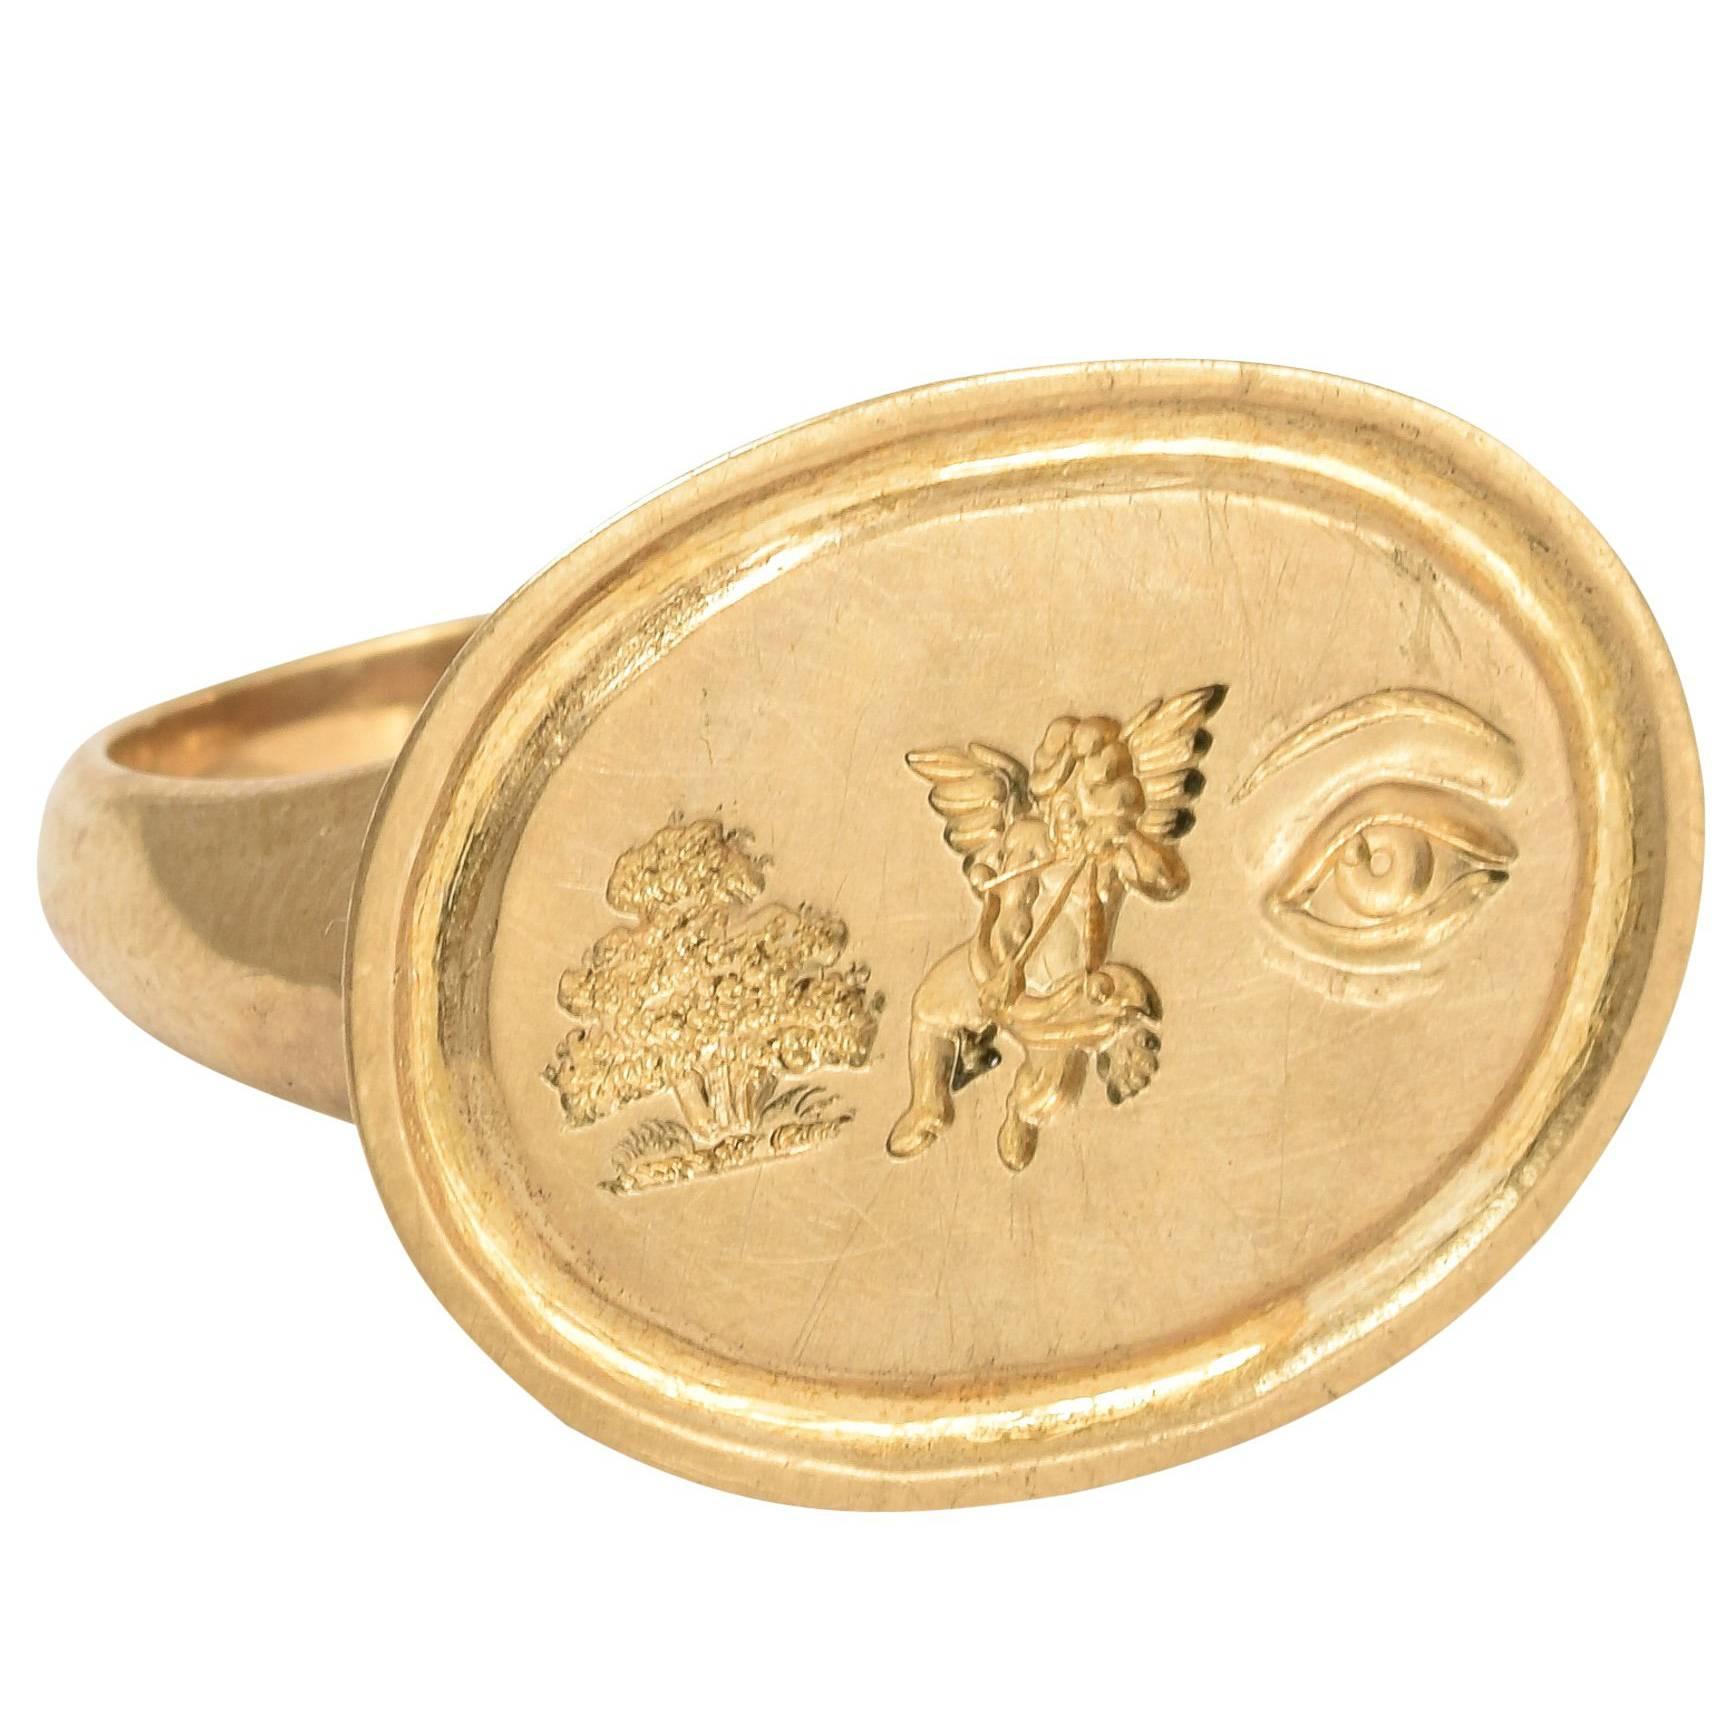 Rebus Puzzle "I Love You" Gold Signet Ring